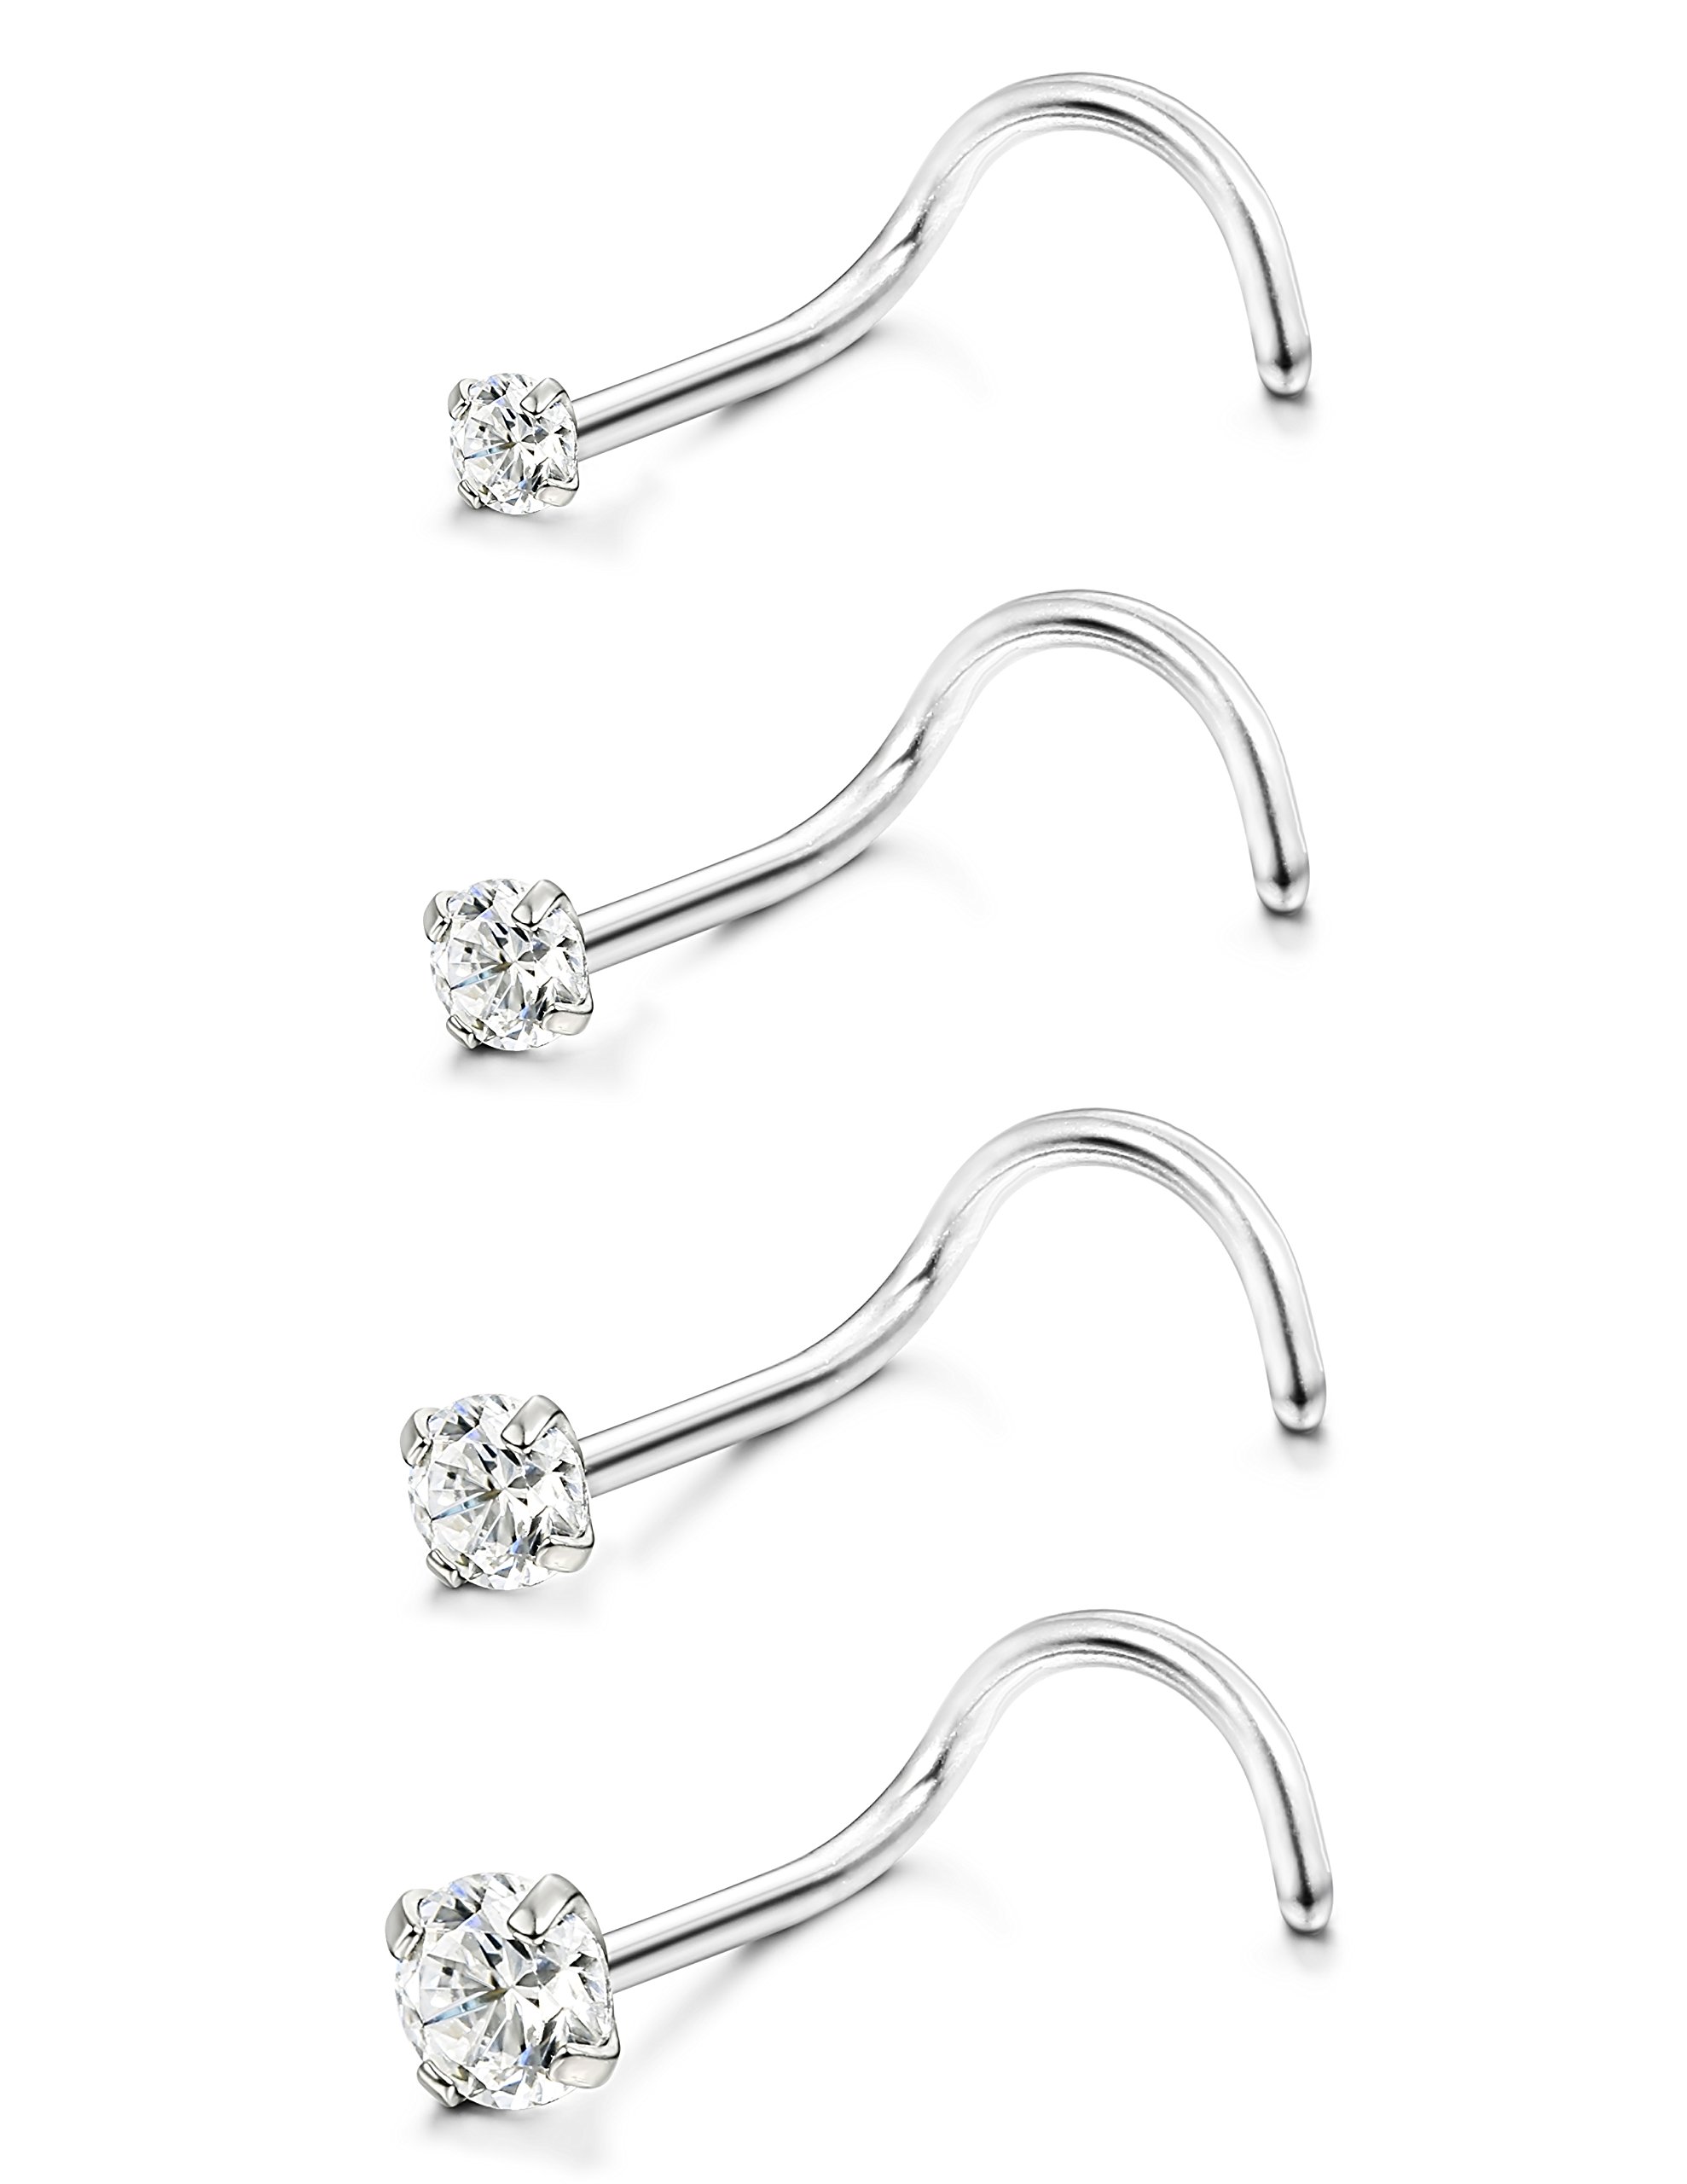 Jstyle 18G 20G 4 Pcs Stainless Steel Nose Rings Studs Screw Piercing Body Jewelry 1.5mm 2mm 2.5mm 3mm Diamond CZ